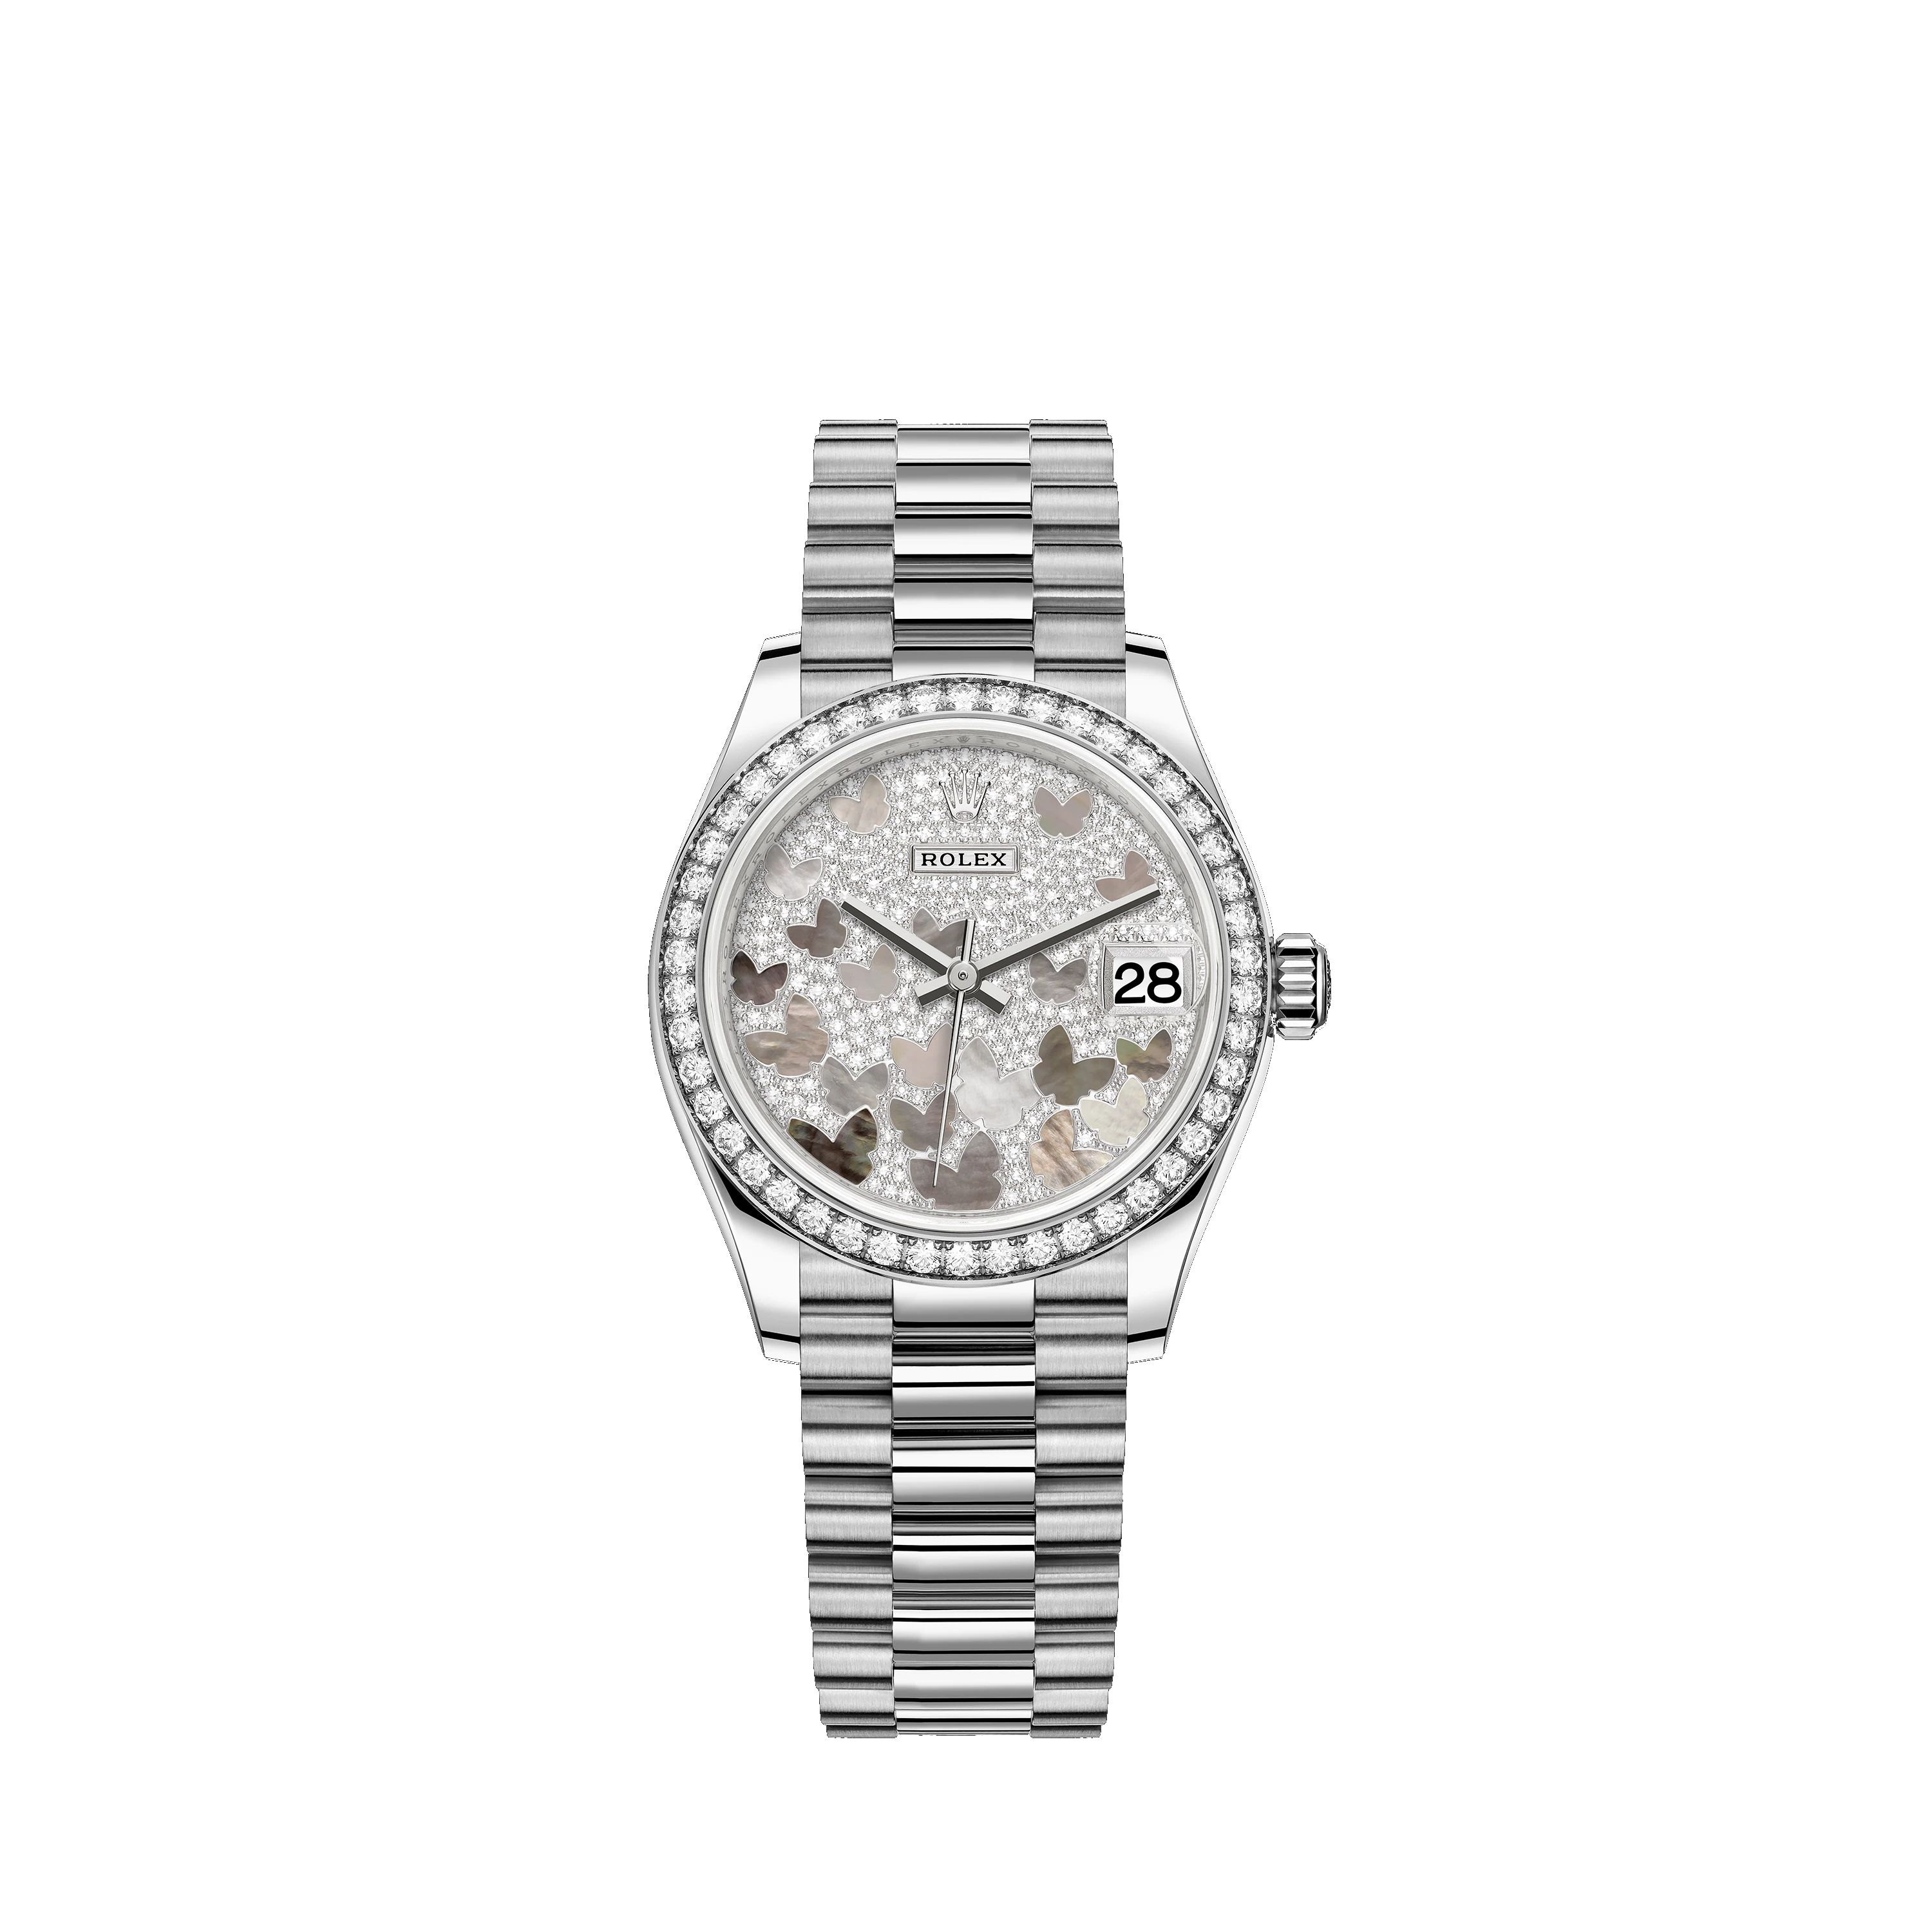 Datejust 31 278289RBR White Gold & Diamonds Watch (Paved, Mother-of-Pearl Butterfly)